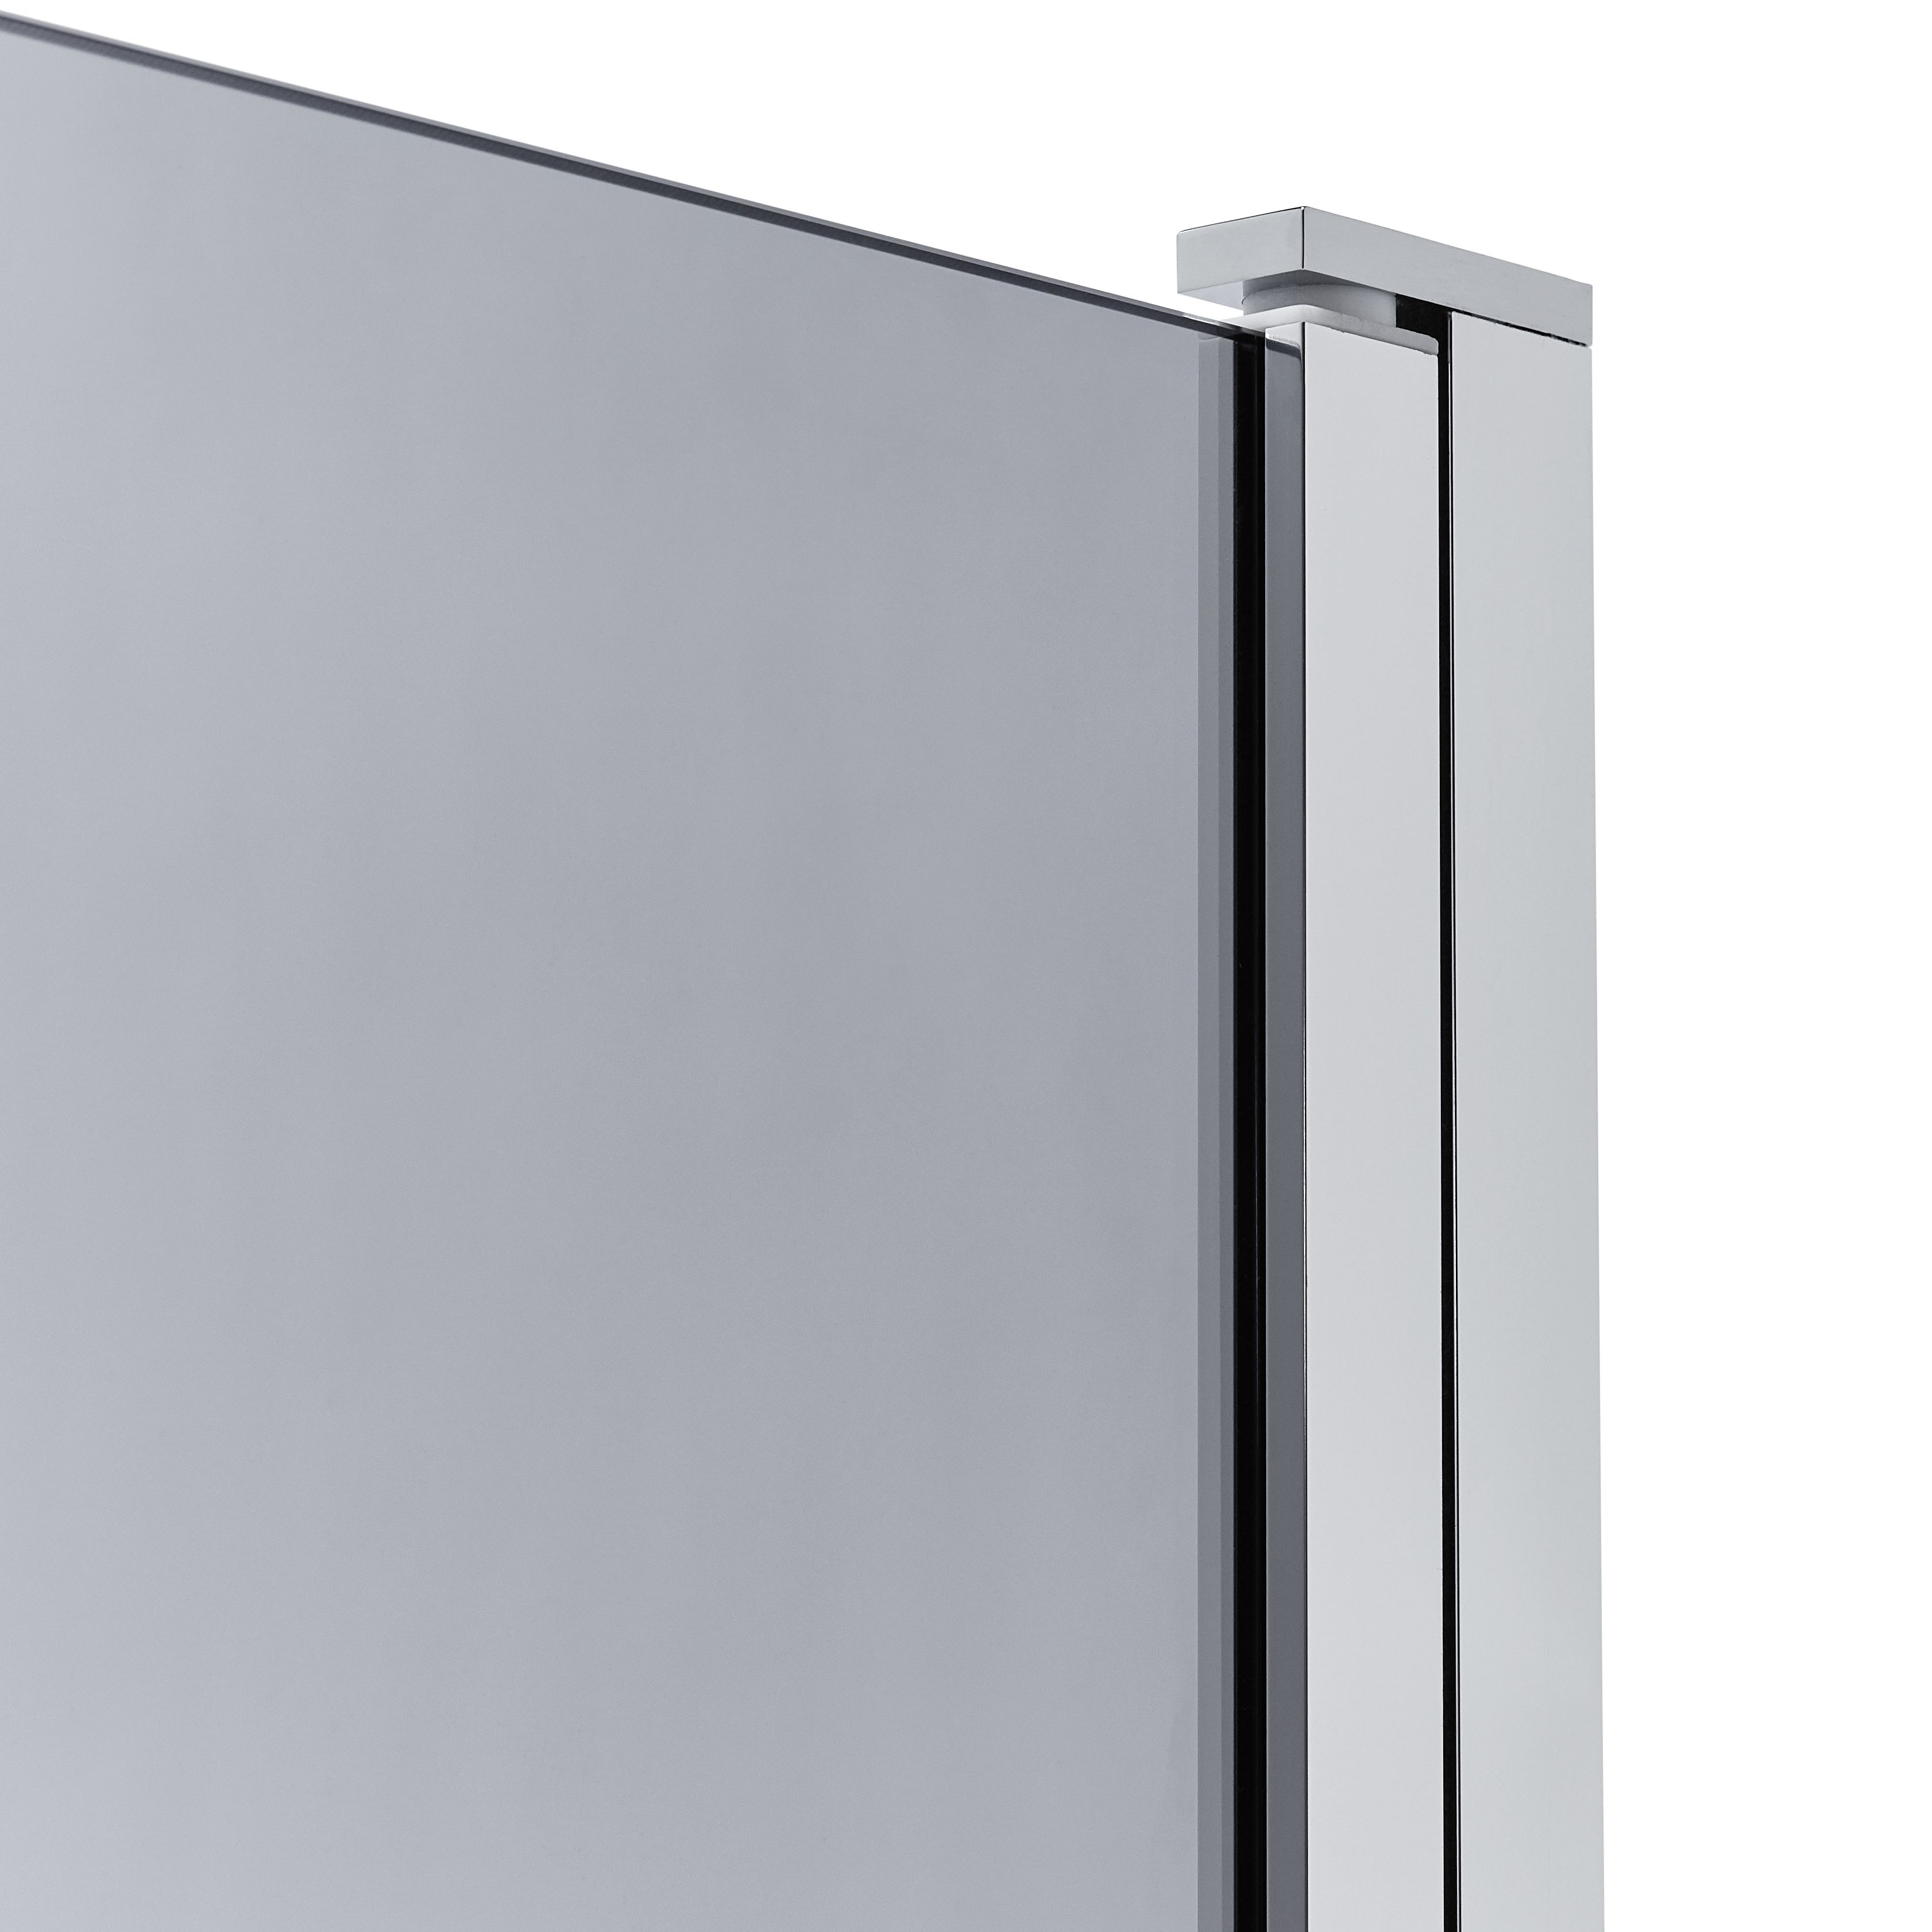 GoodHome Nubia Straight 1 panel Smoked grey Silver effect frame Bath screen, (H)150cm (W)950mm